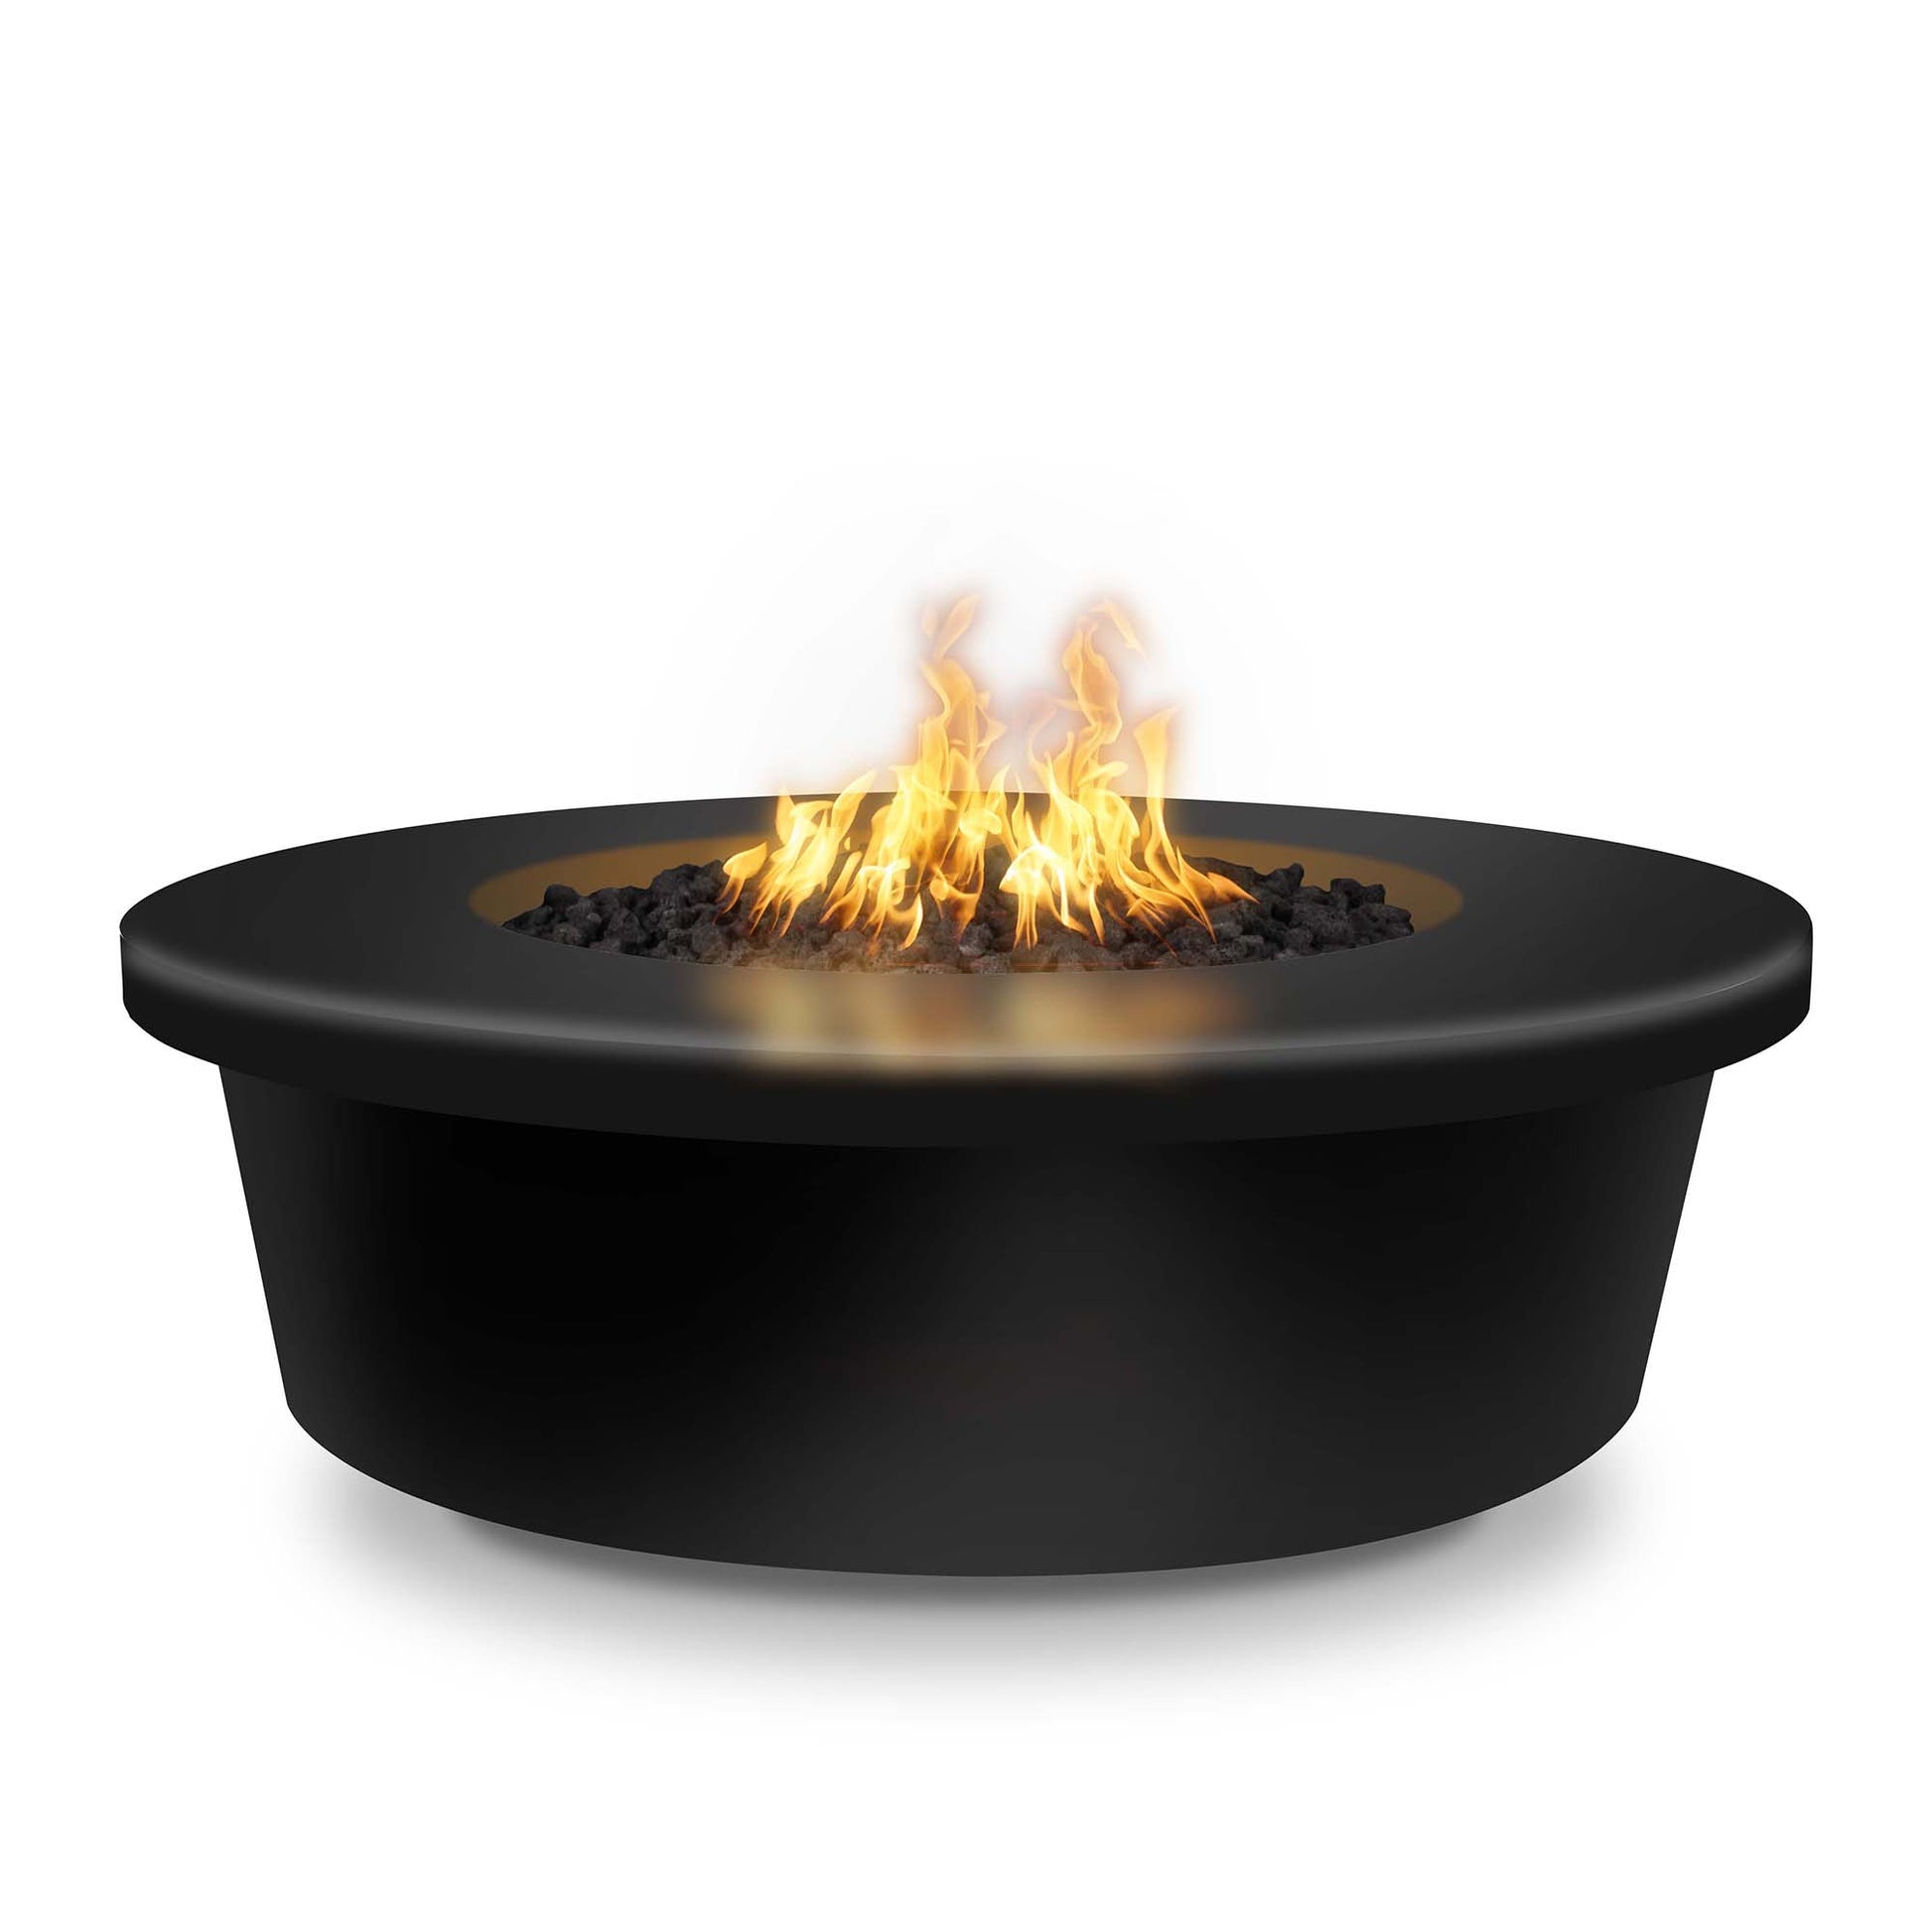 The Outdoor Plus Round Tempe 48" Hammered Copper Liquid Propane Fire Pit with 12V Electronic Ignition